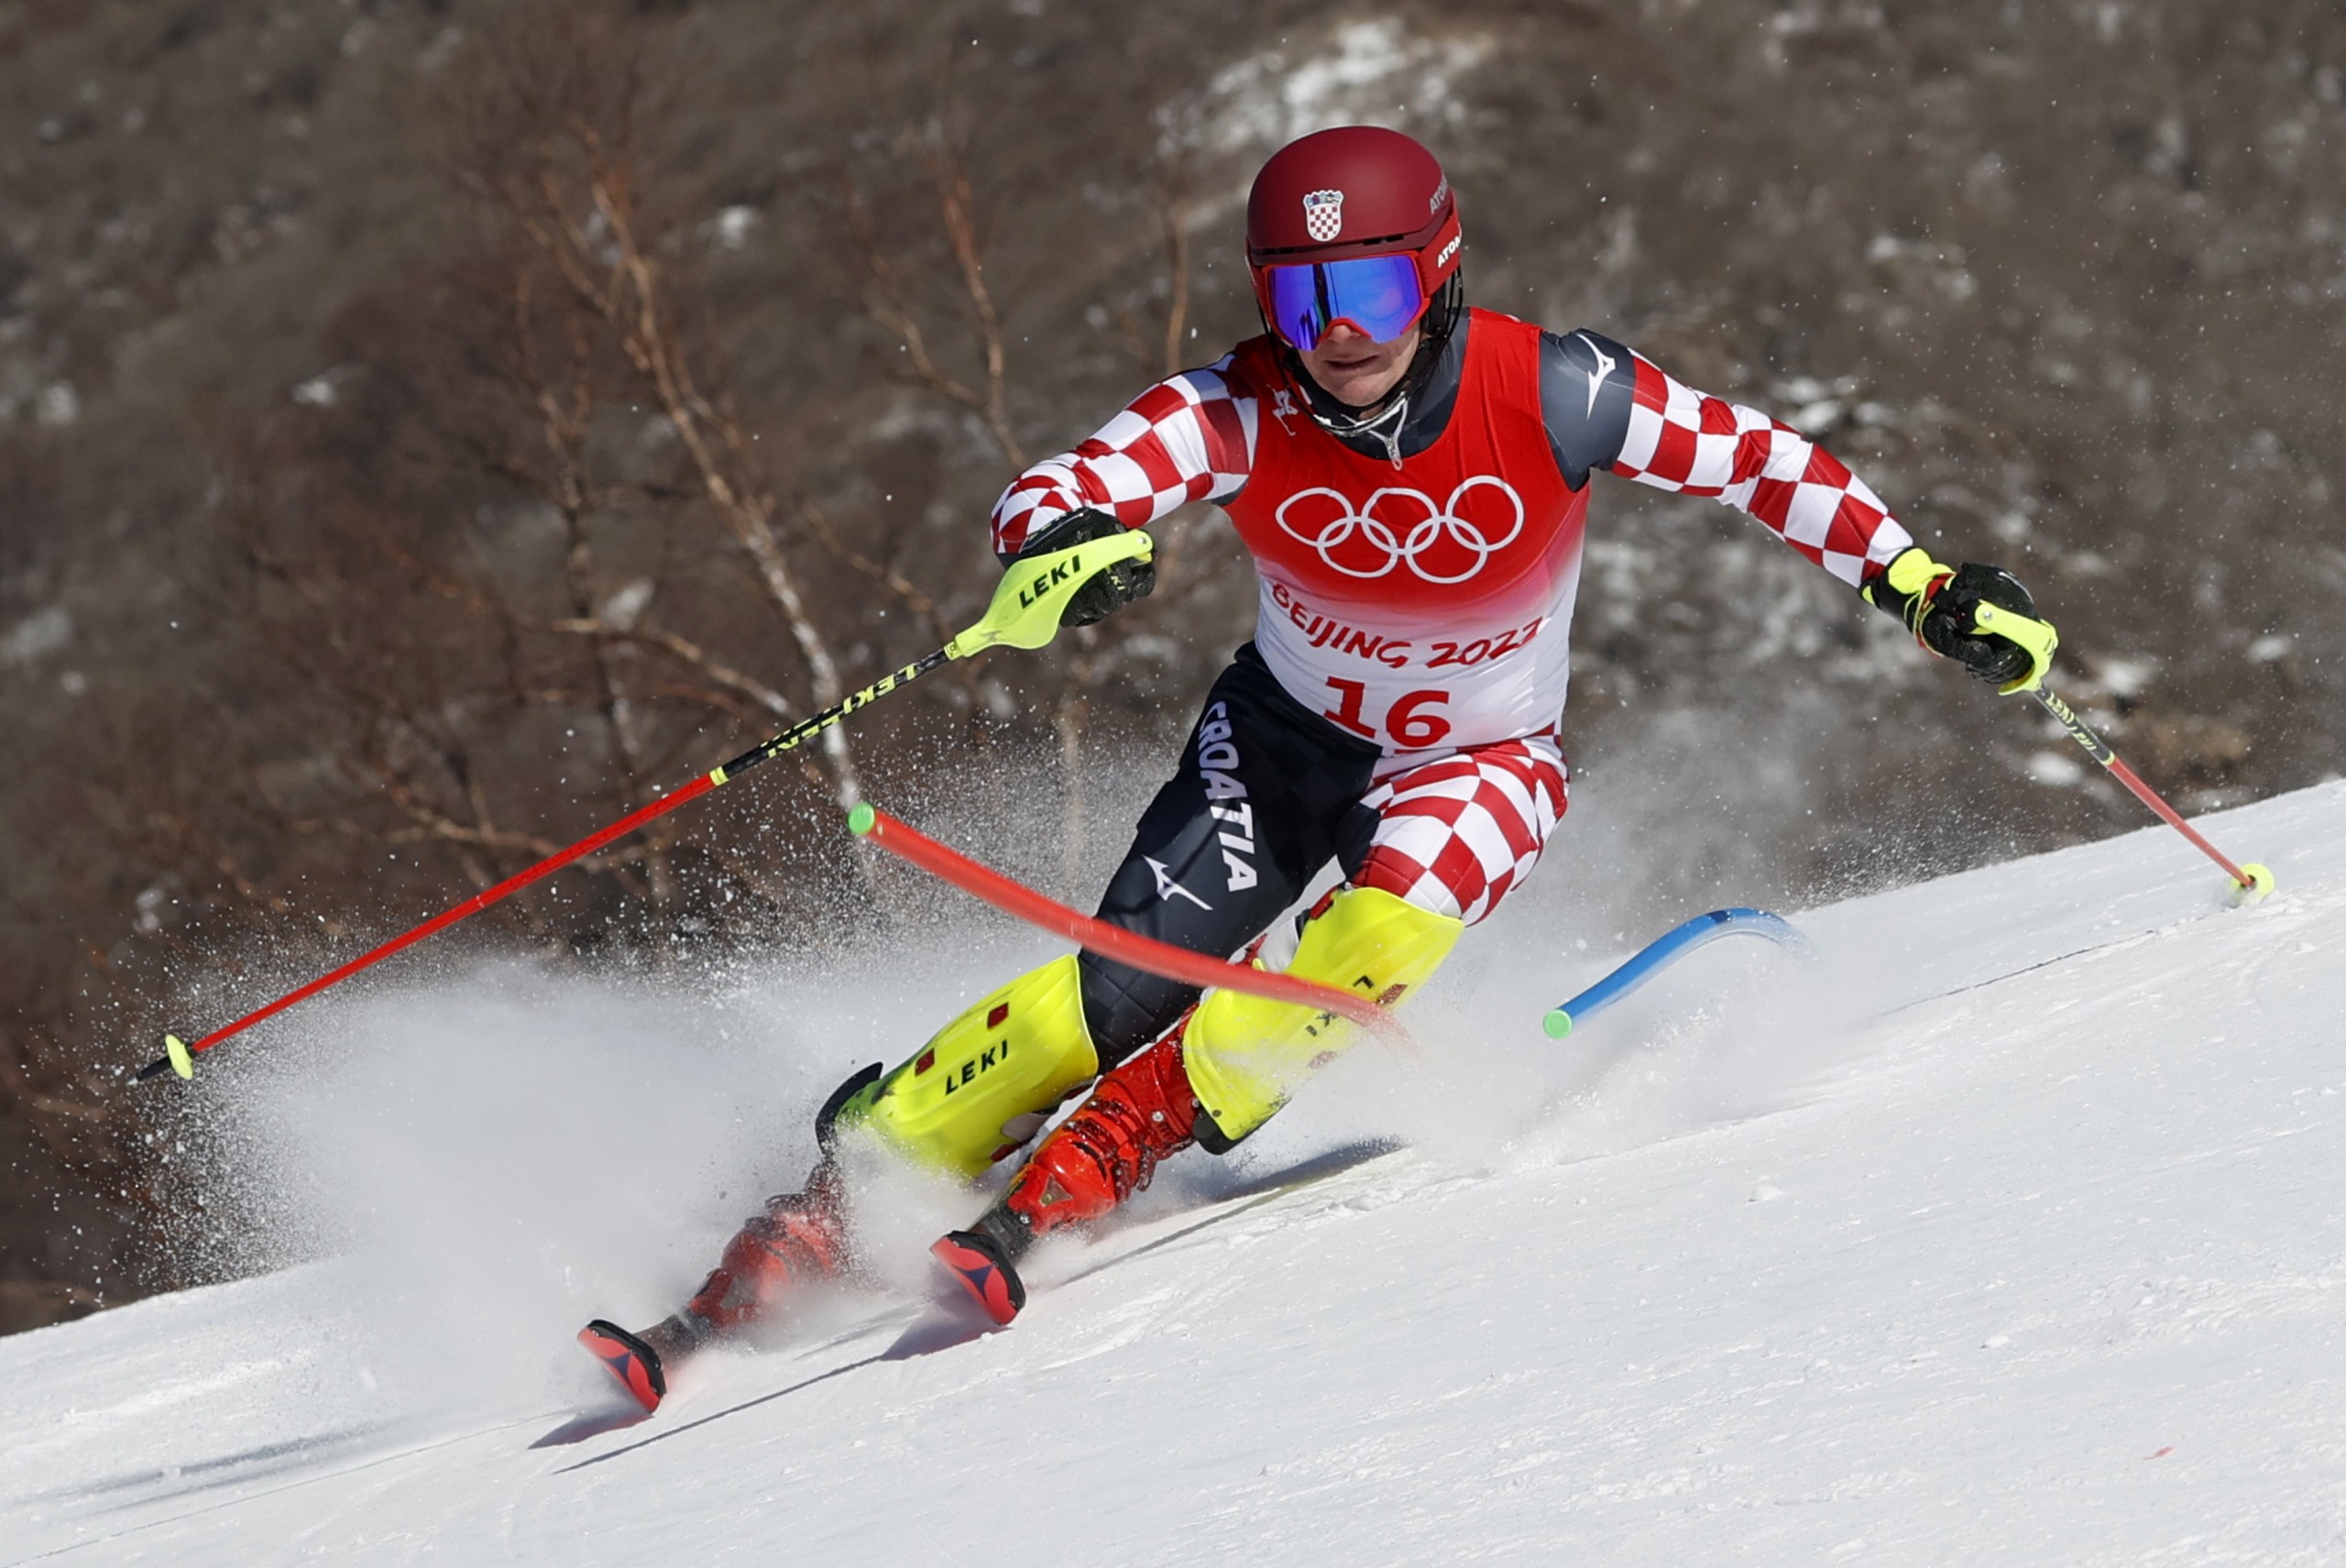 epa09760603 Filip Zubcic of Croatia during the first run of the Men's Slalom race of the Alpine Skiing events of the Beijing 2022 Olympic Games at the Yanqing National Alpine Ski Centre Skiing, Beijing municipality, China, 16 February 2022.  EPA/GUILLAUME HORCAJUELO